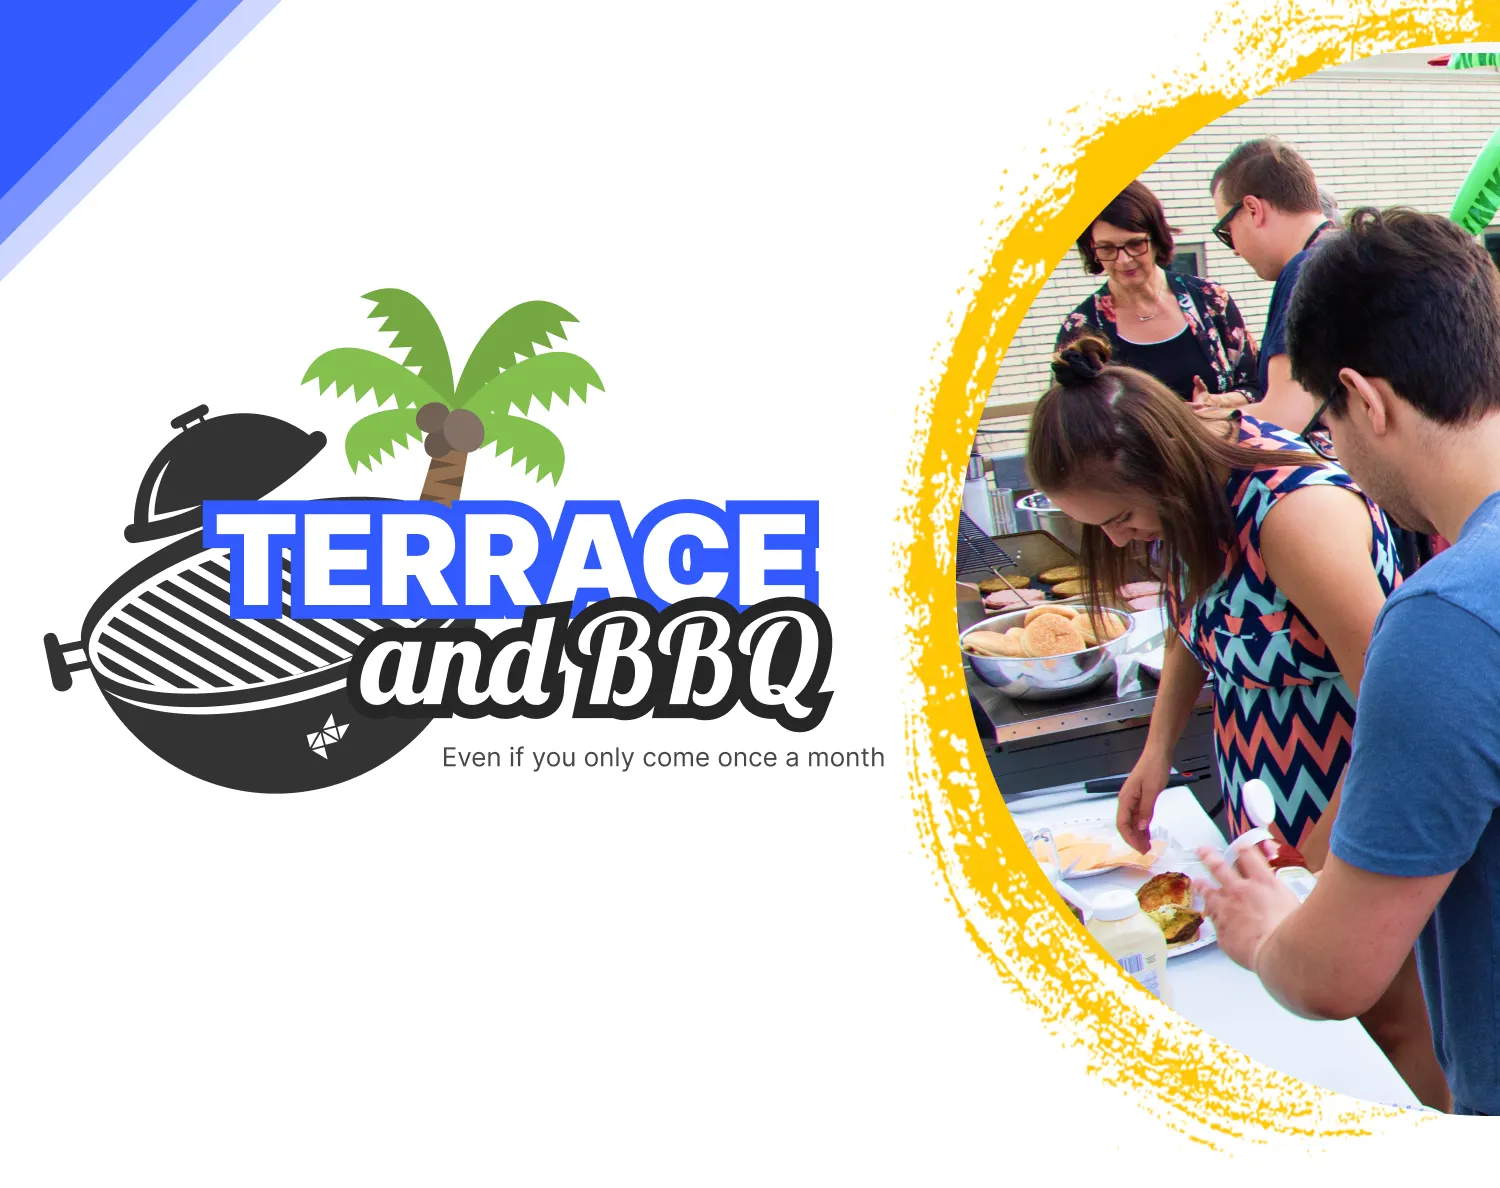 Terrace and bbq even if you come once a month